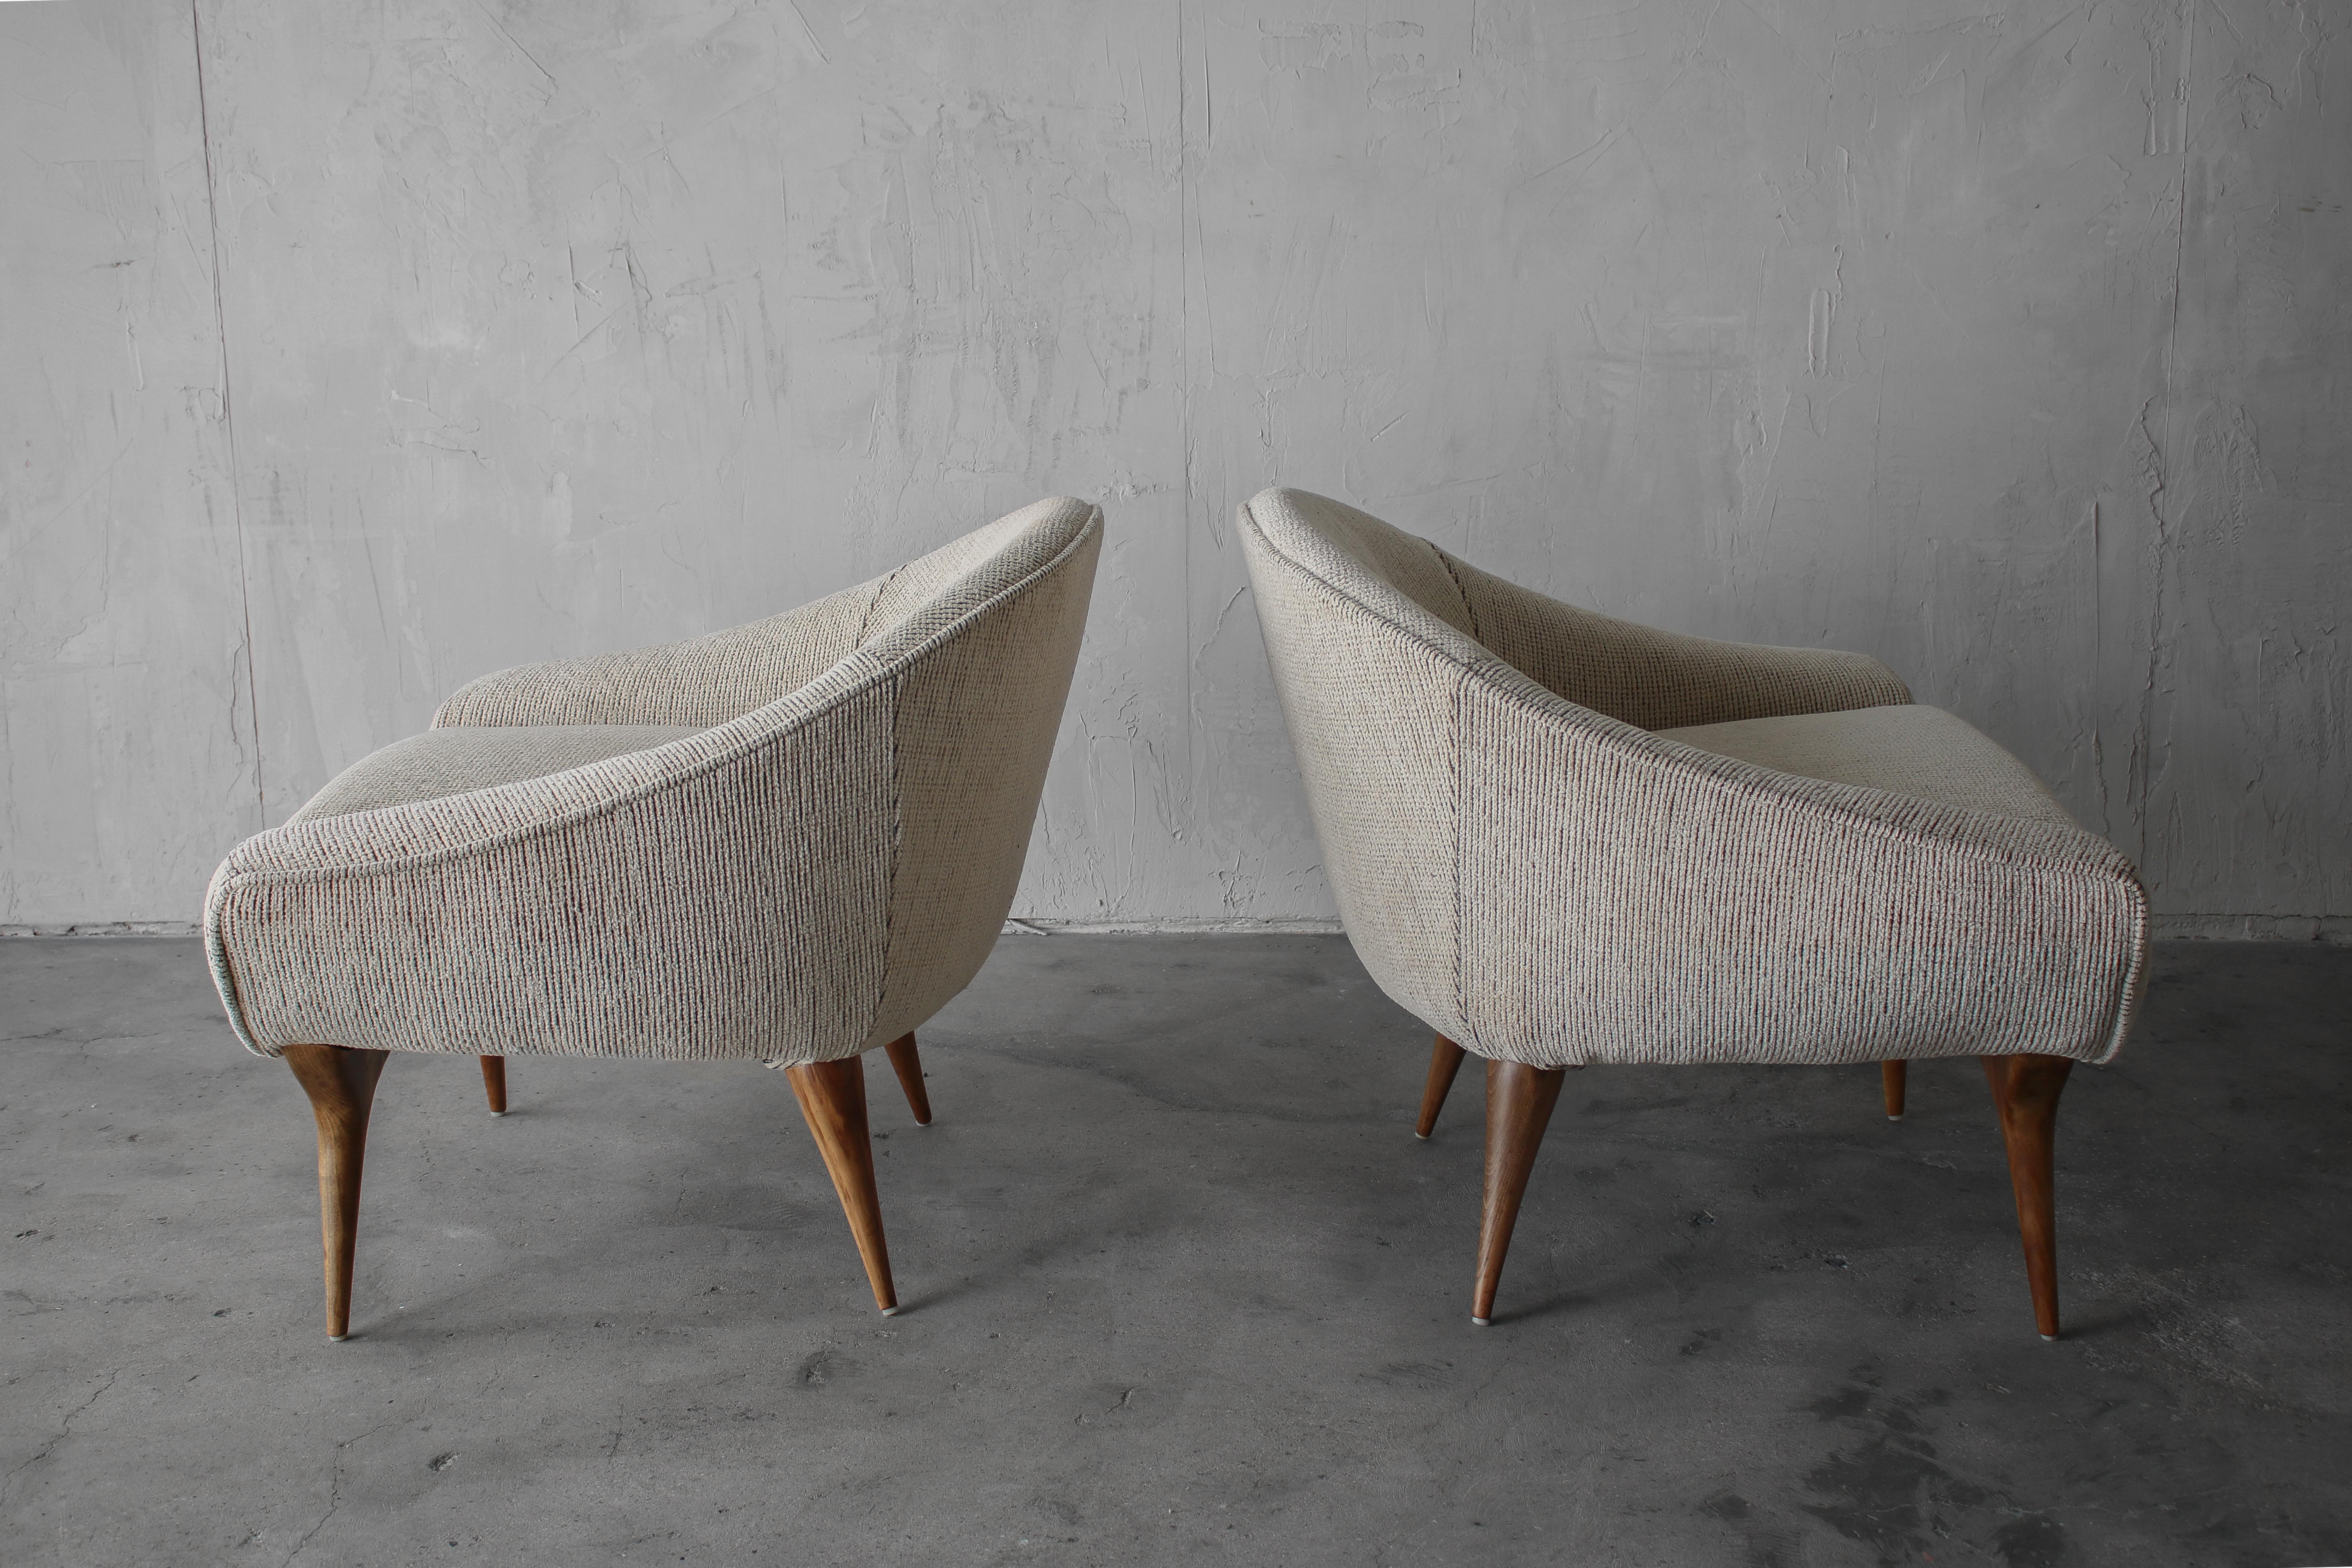 20th Century Rare Pair of Midcentury Lounge Chairs by Karpen